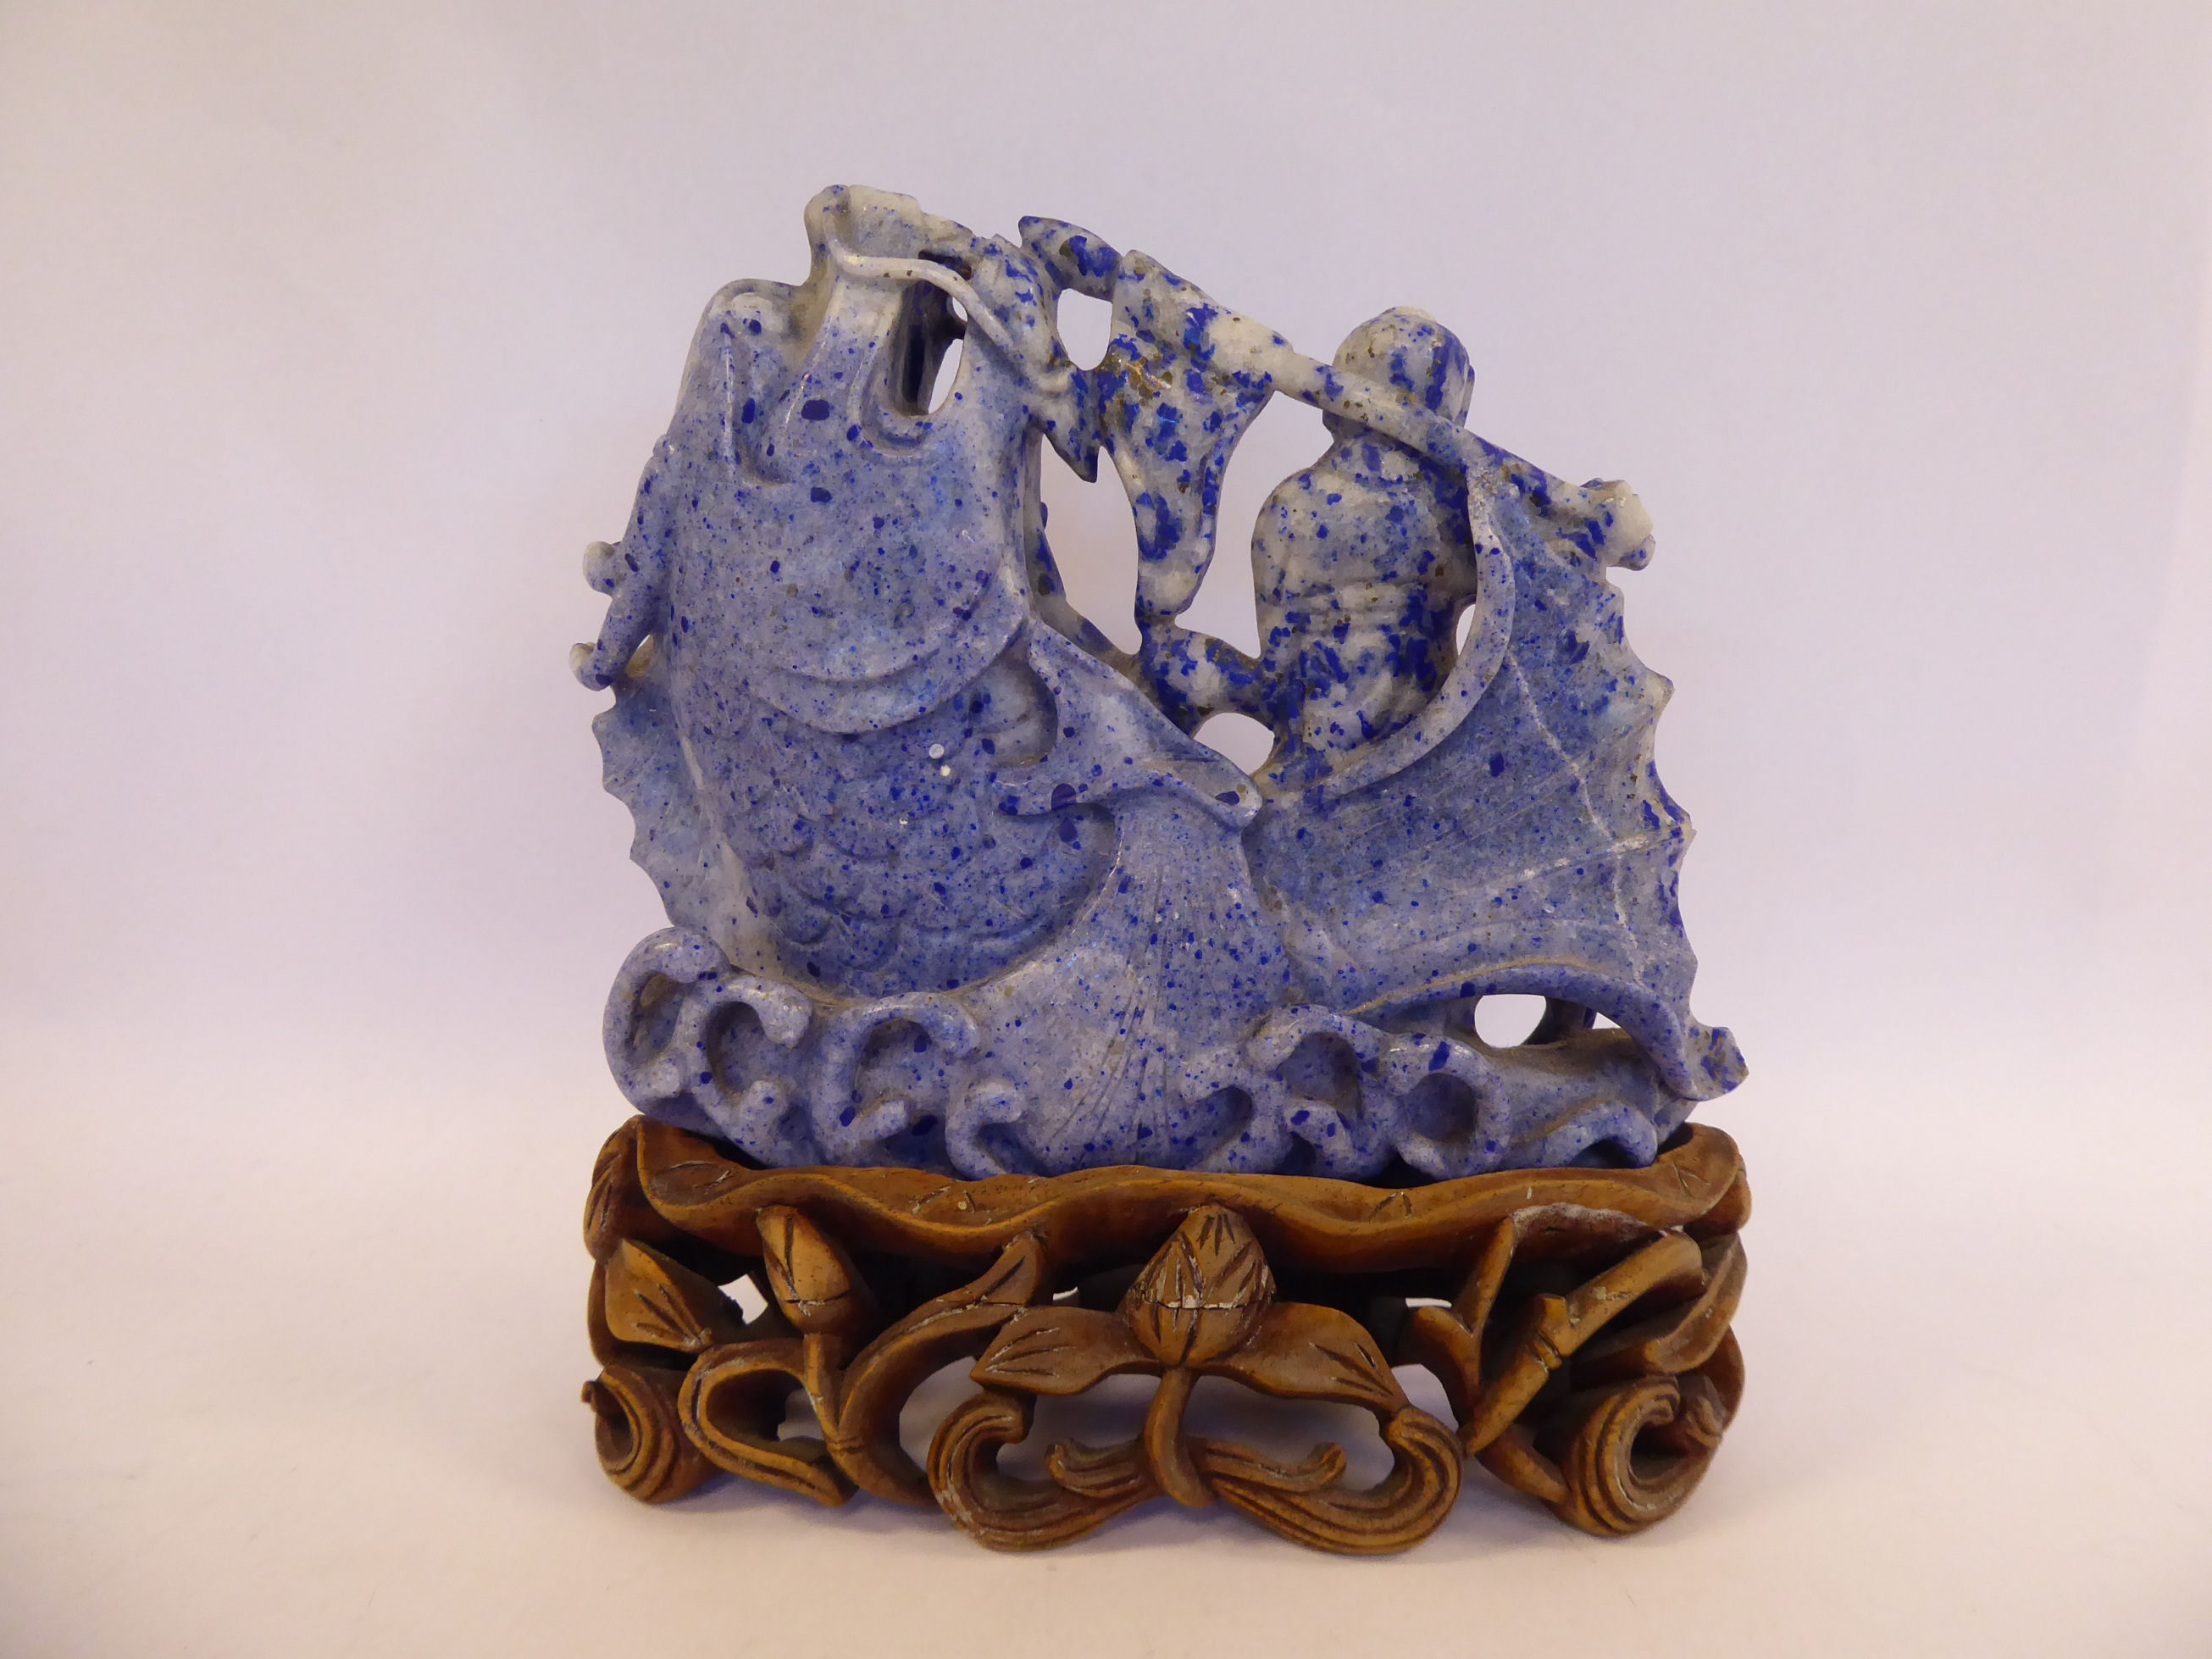 A Chinese carved lapis lazuli model, a dragon-fish emerging from cresting waves, - Image 2 of 8